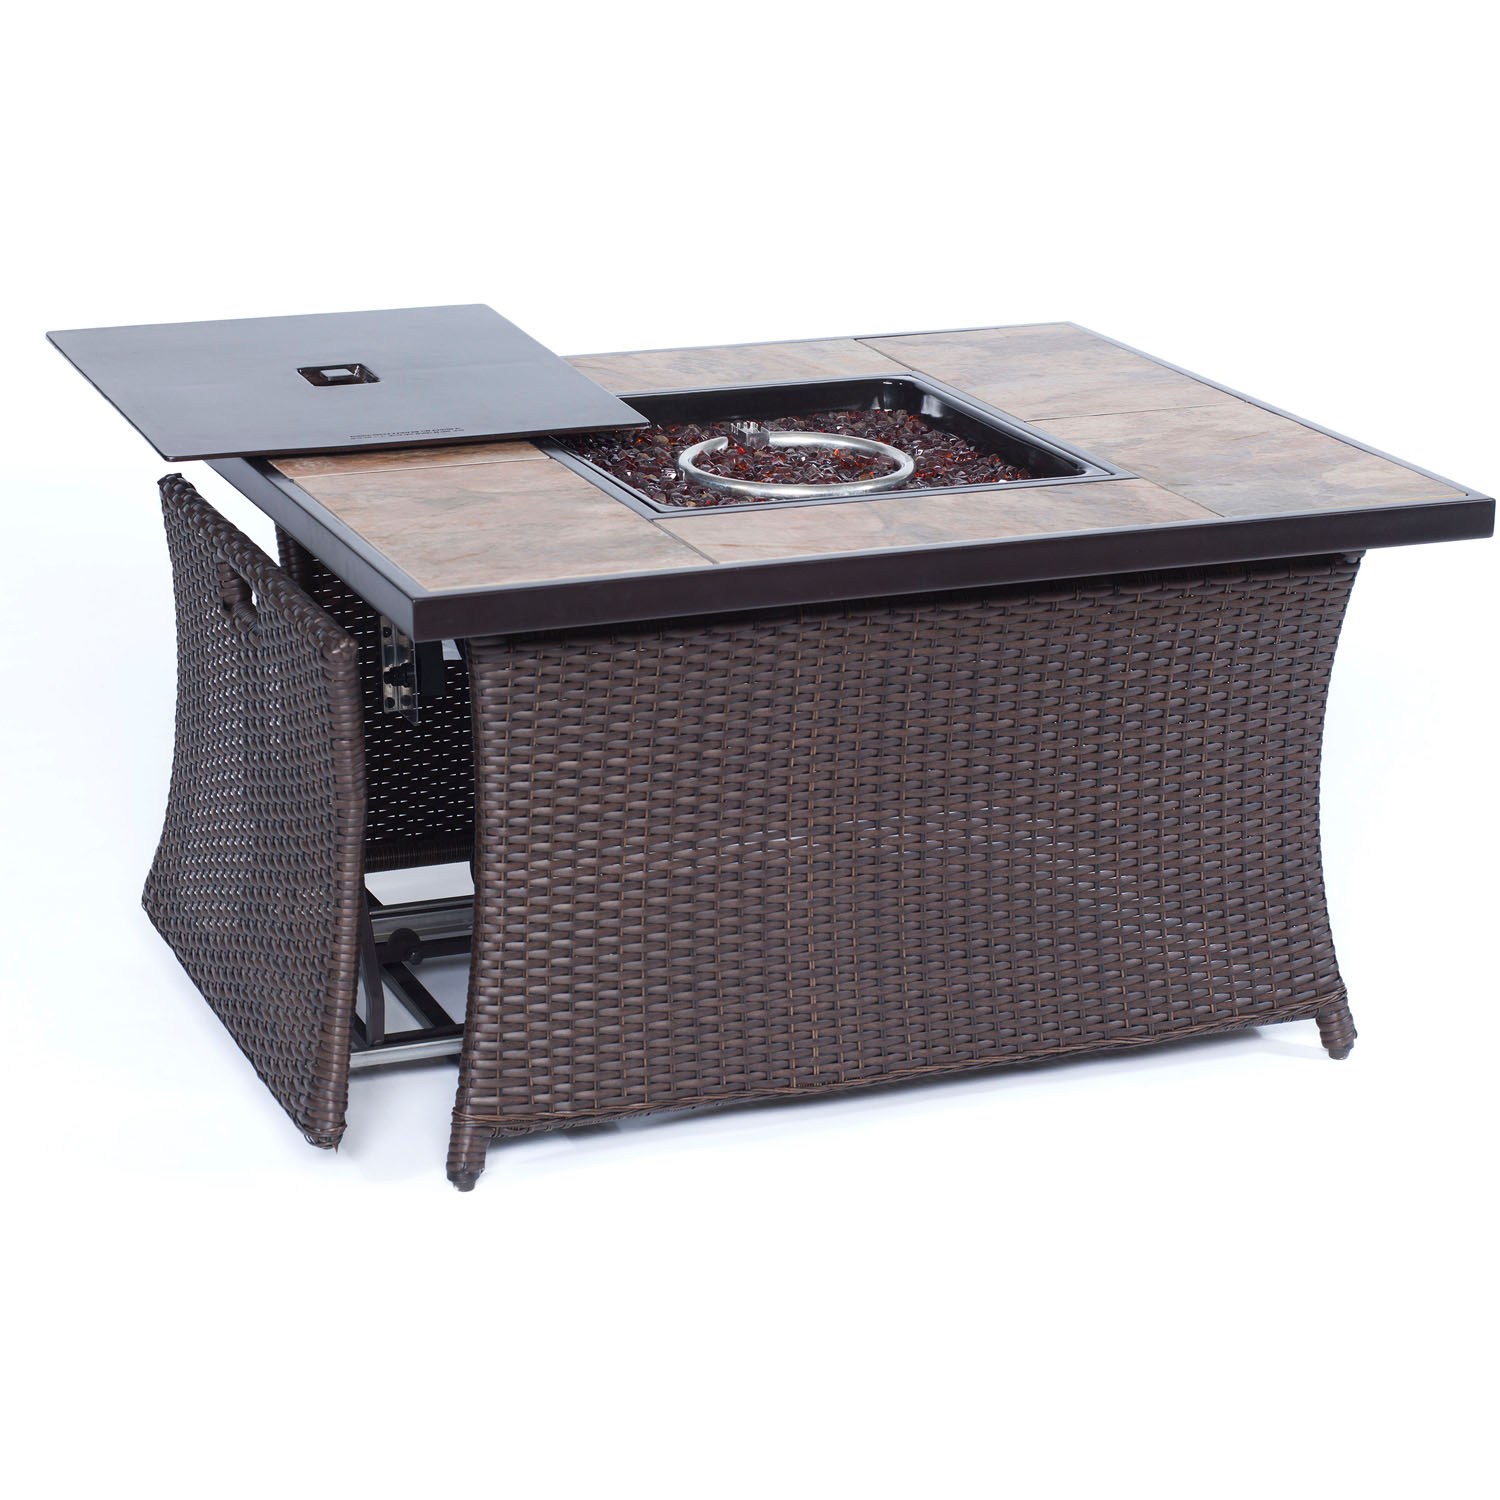 Hanover Orleans 4-Piece Woven Fire Pit Lounge Set with Faux-Stone Tile Top - image 5 of 8